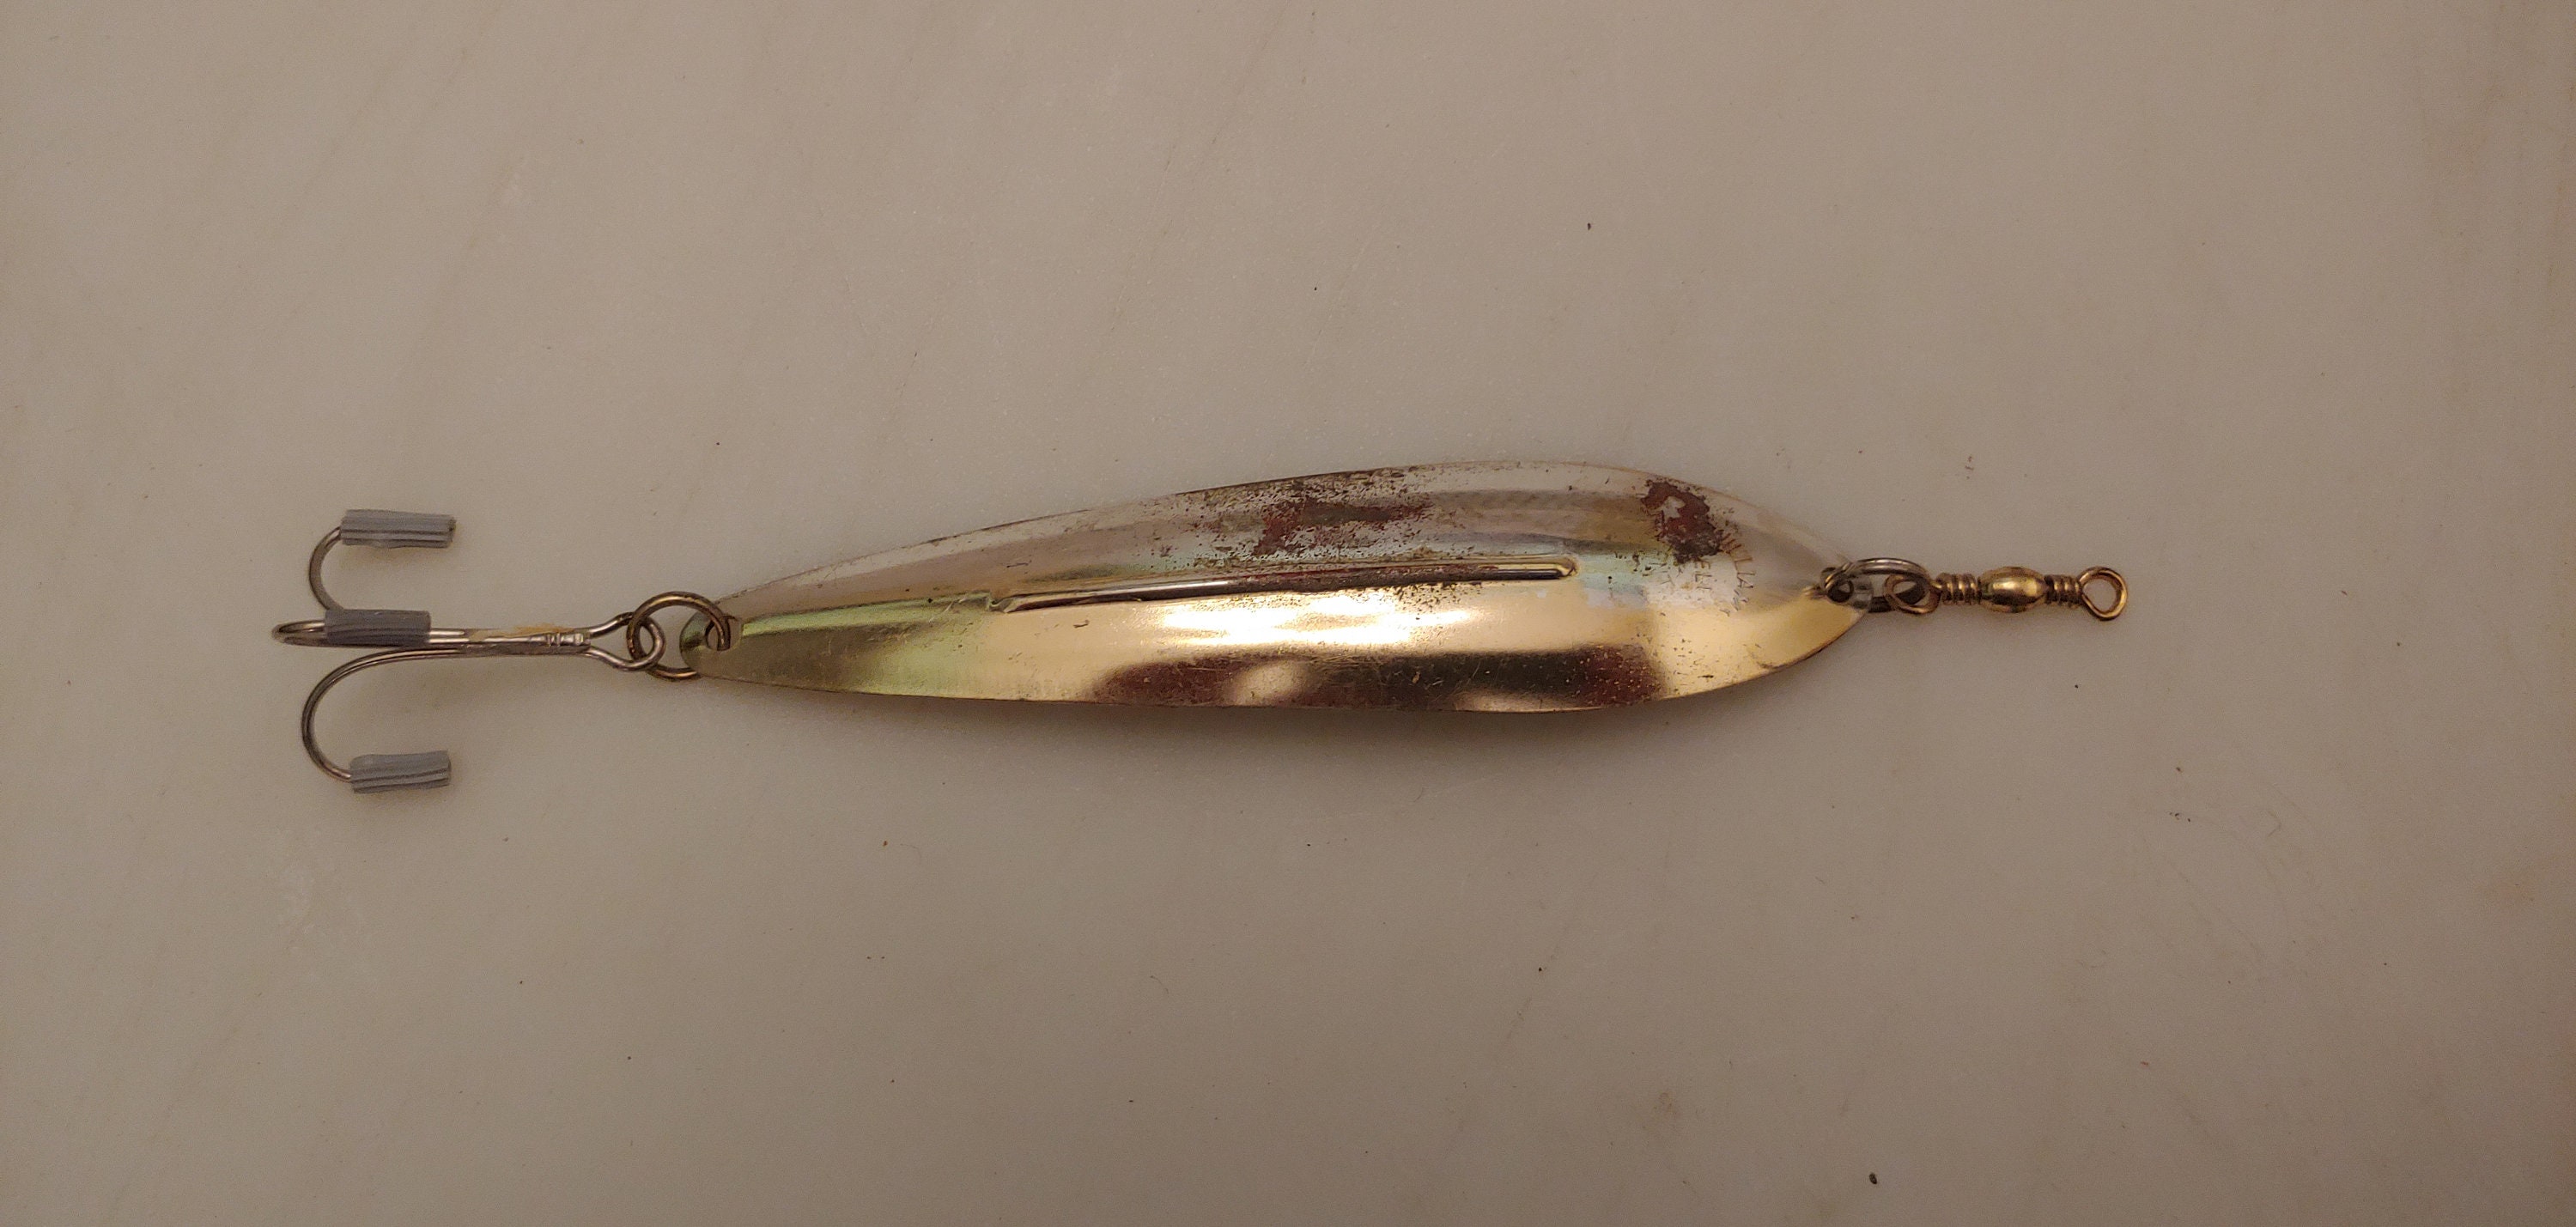 Vintage 1950s BrylCreem's Royal Spoon Gold Metal Spoon Fishing Lure.